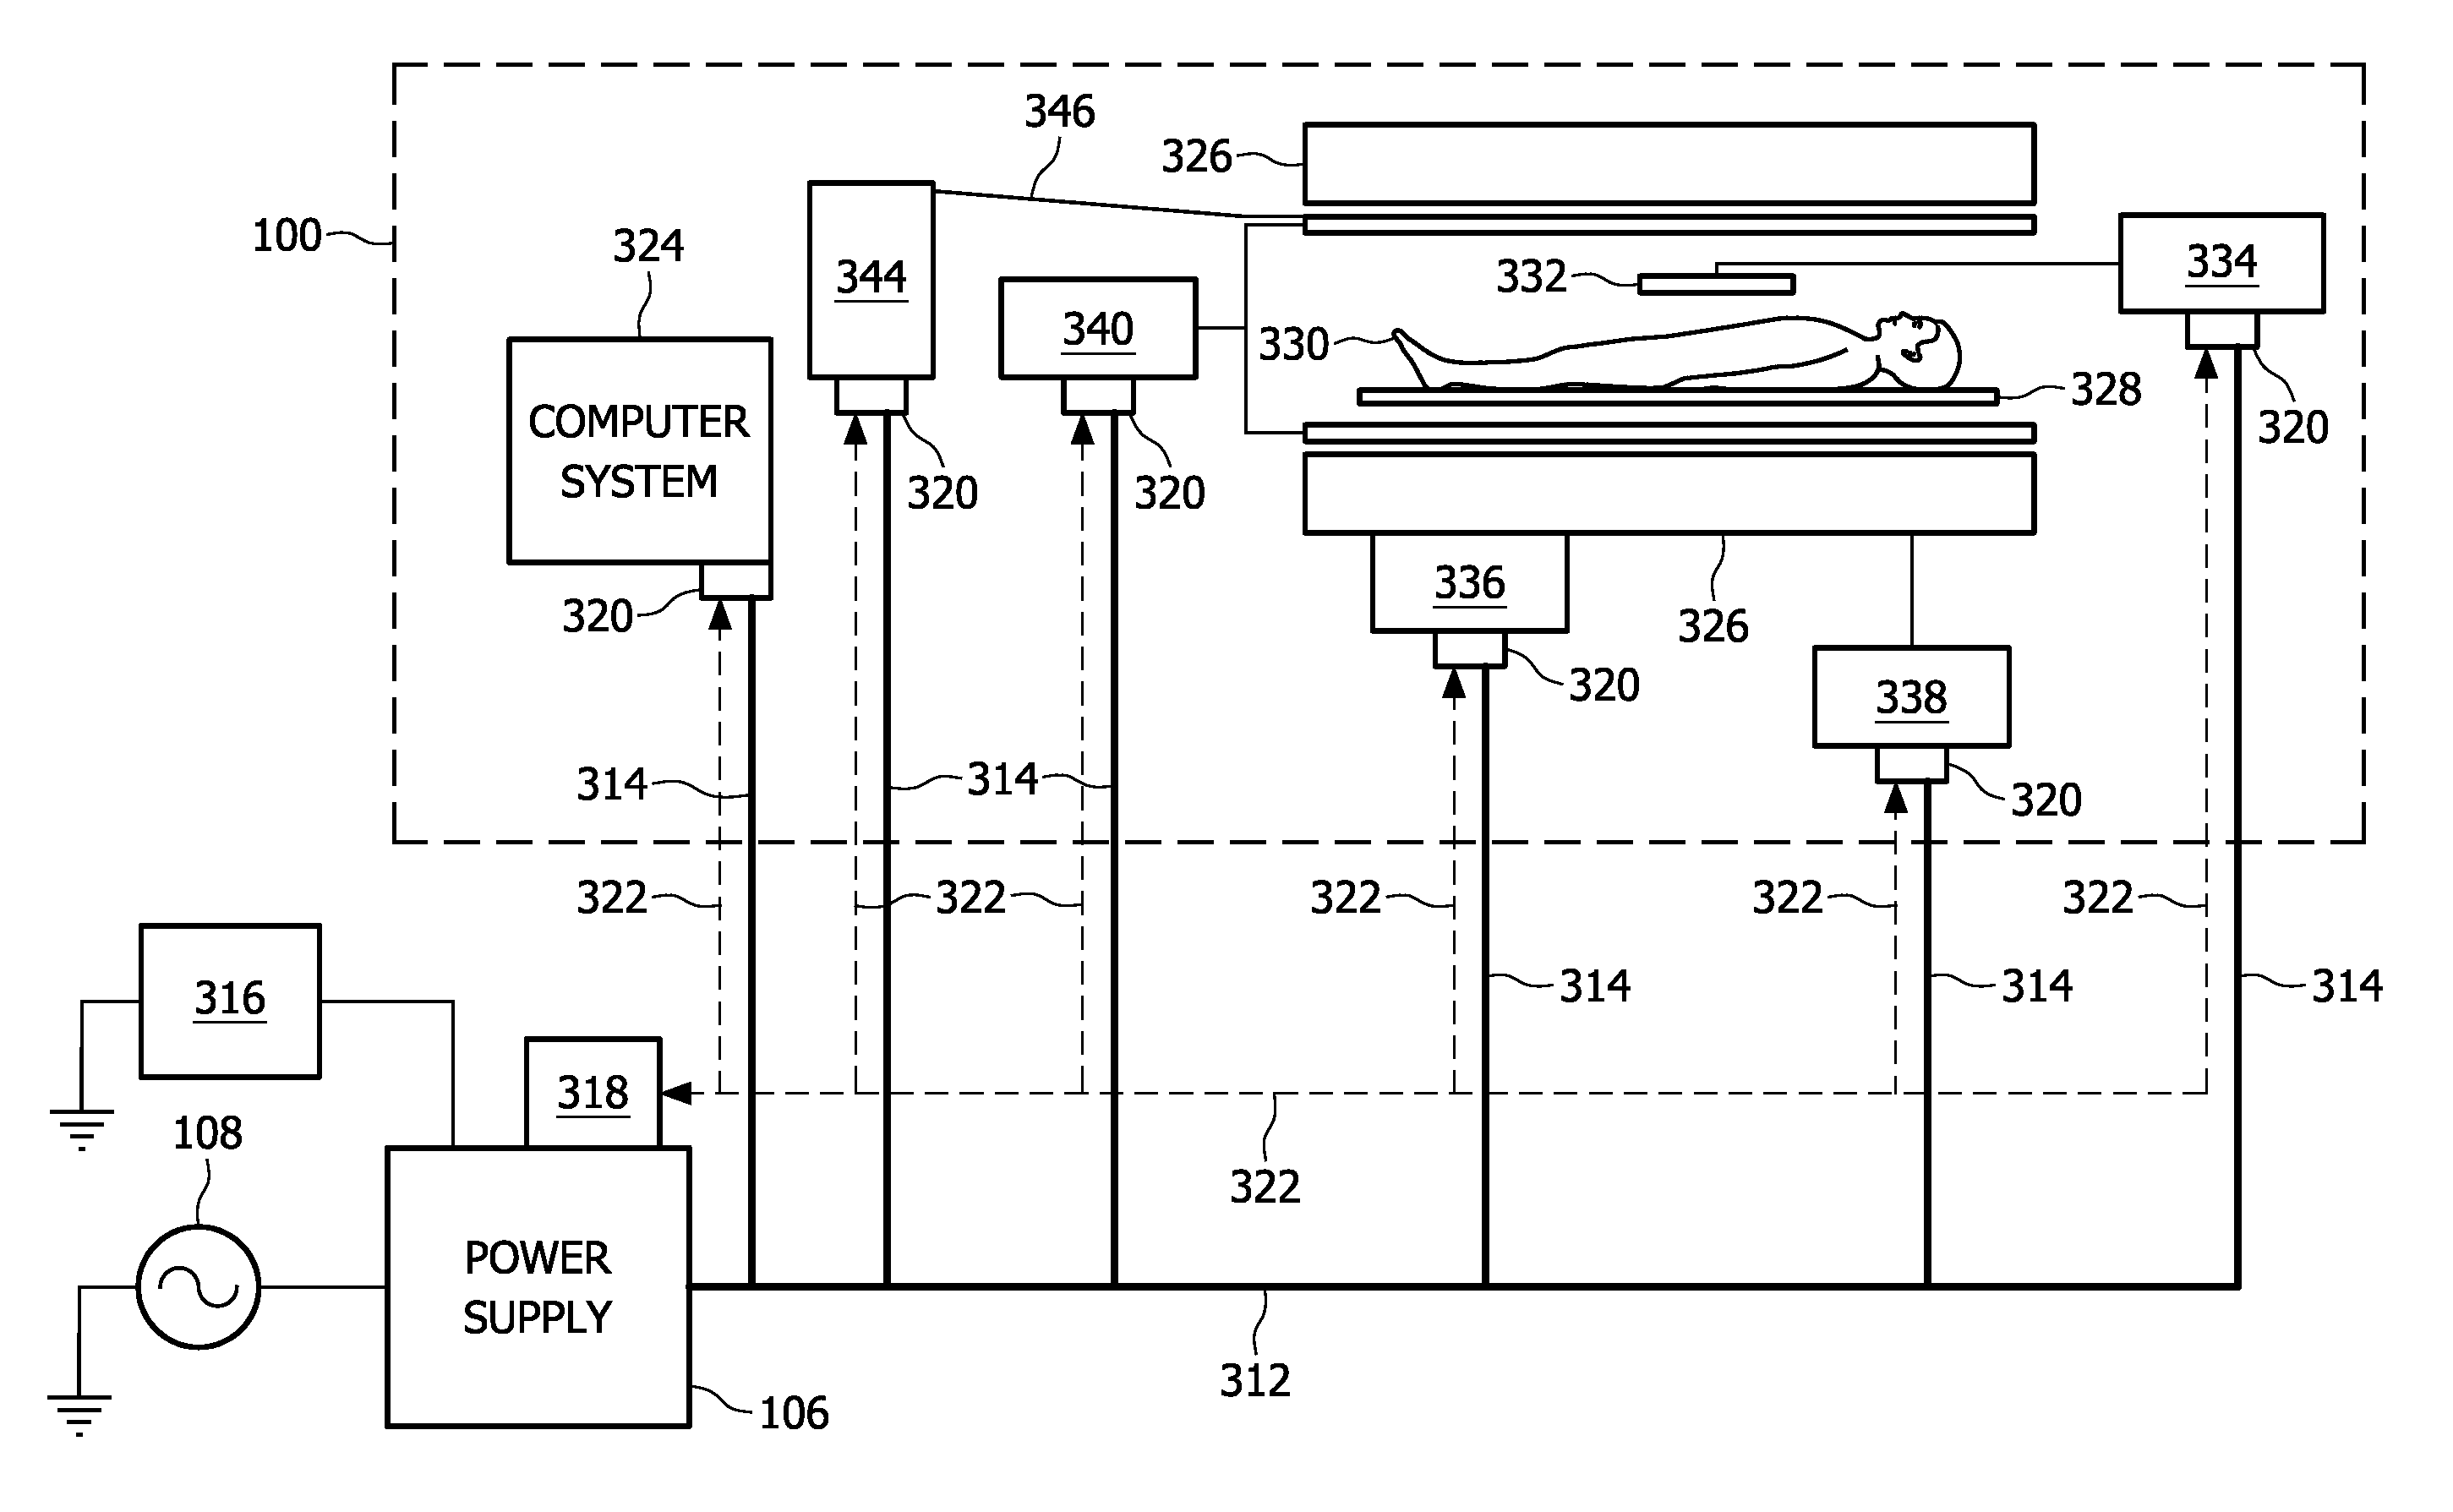 Magnetic resonance imaging system comprising a power supply unit adapted for providing direct current electrical power